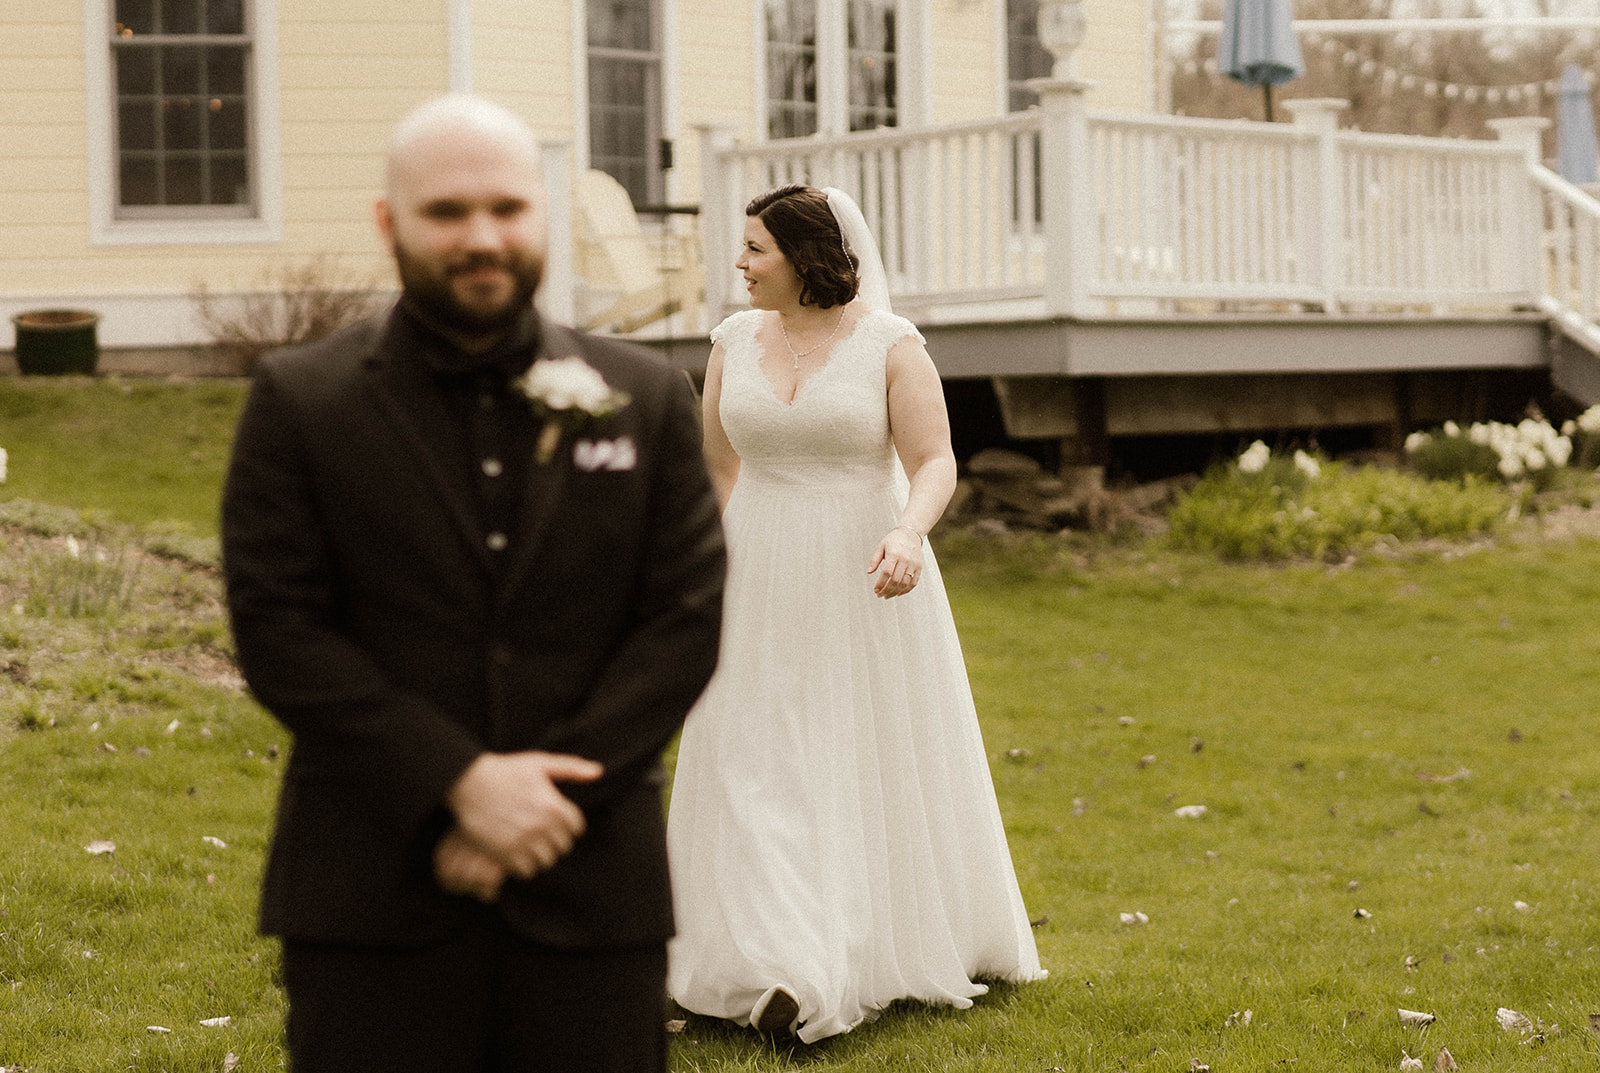 Bride approaches her handsome groom for first look photos